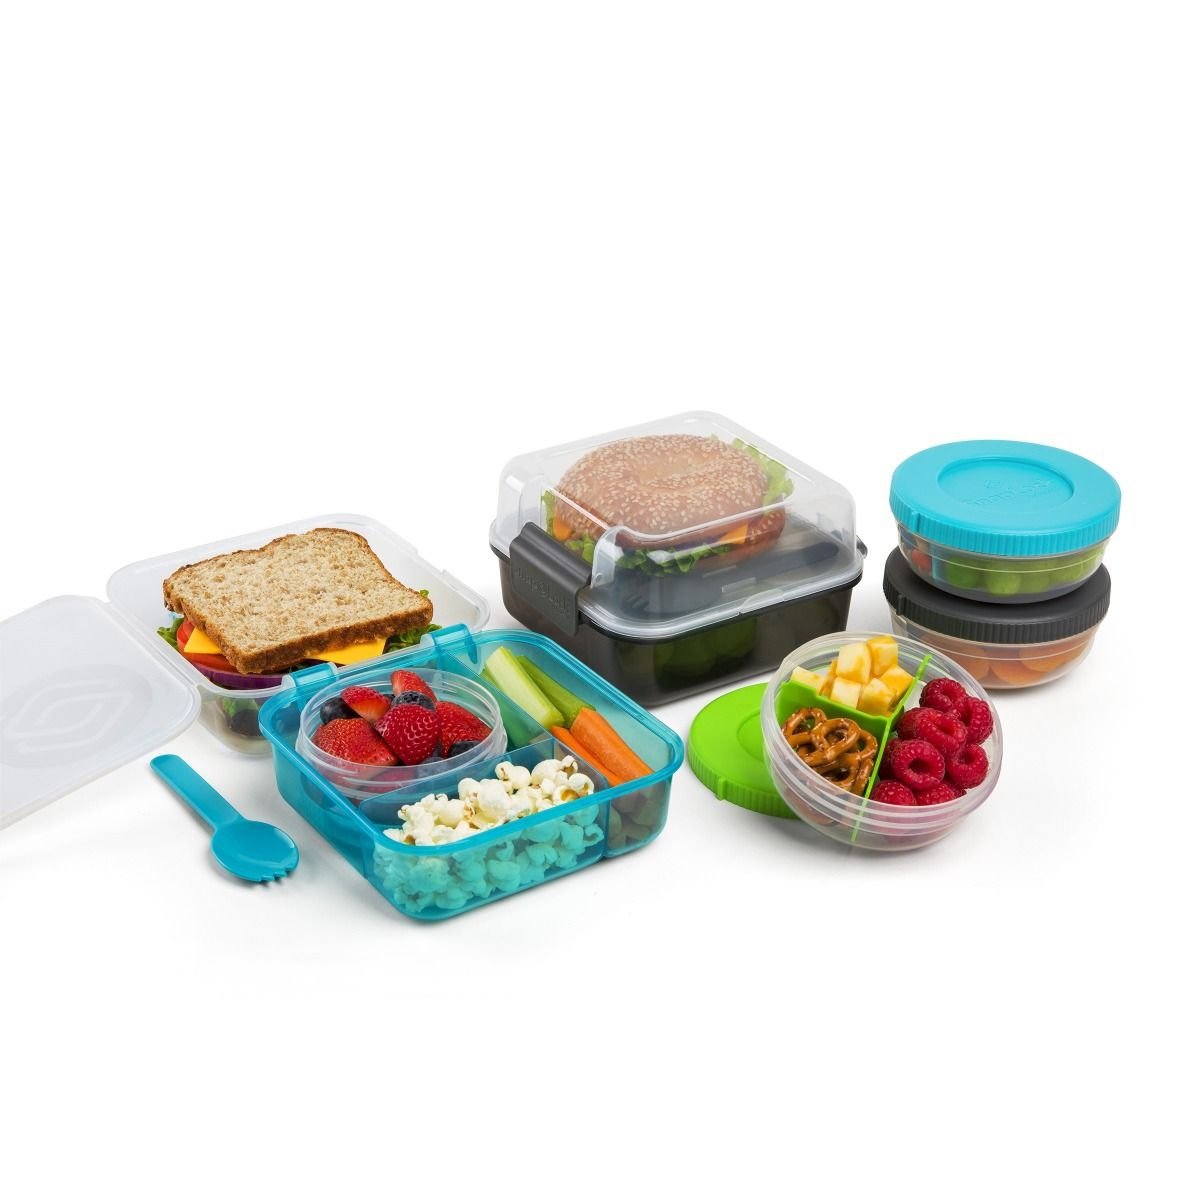 3pcs Food Lunch Box Bento Divider Cup Easy Clean Sushi Storage